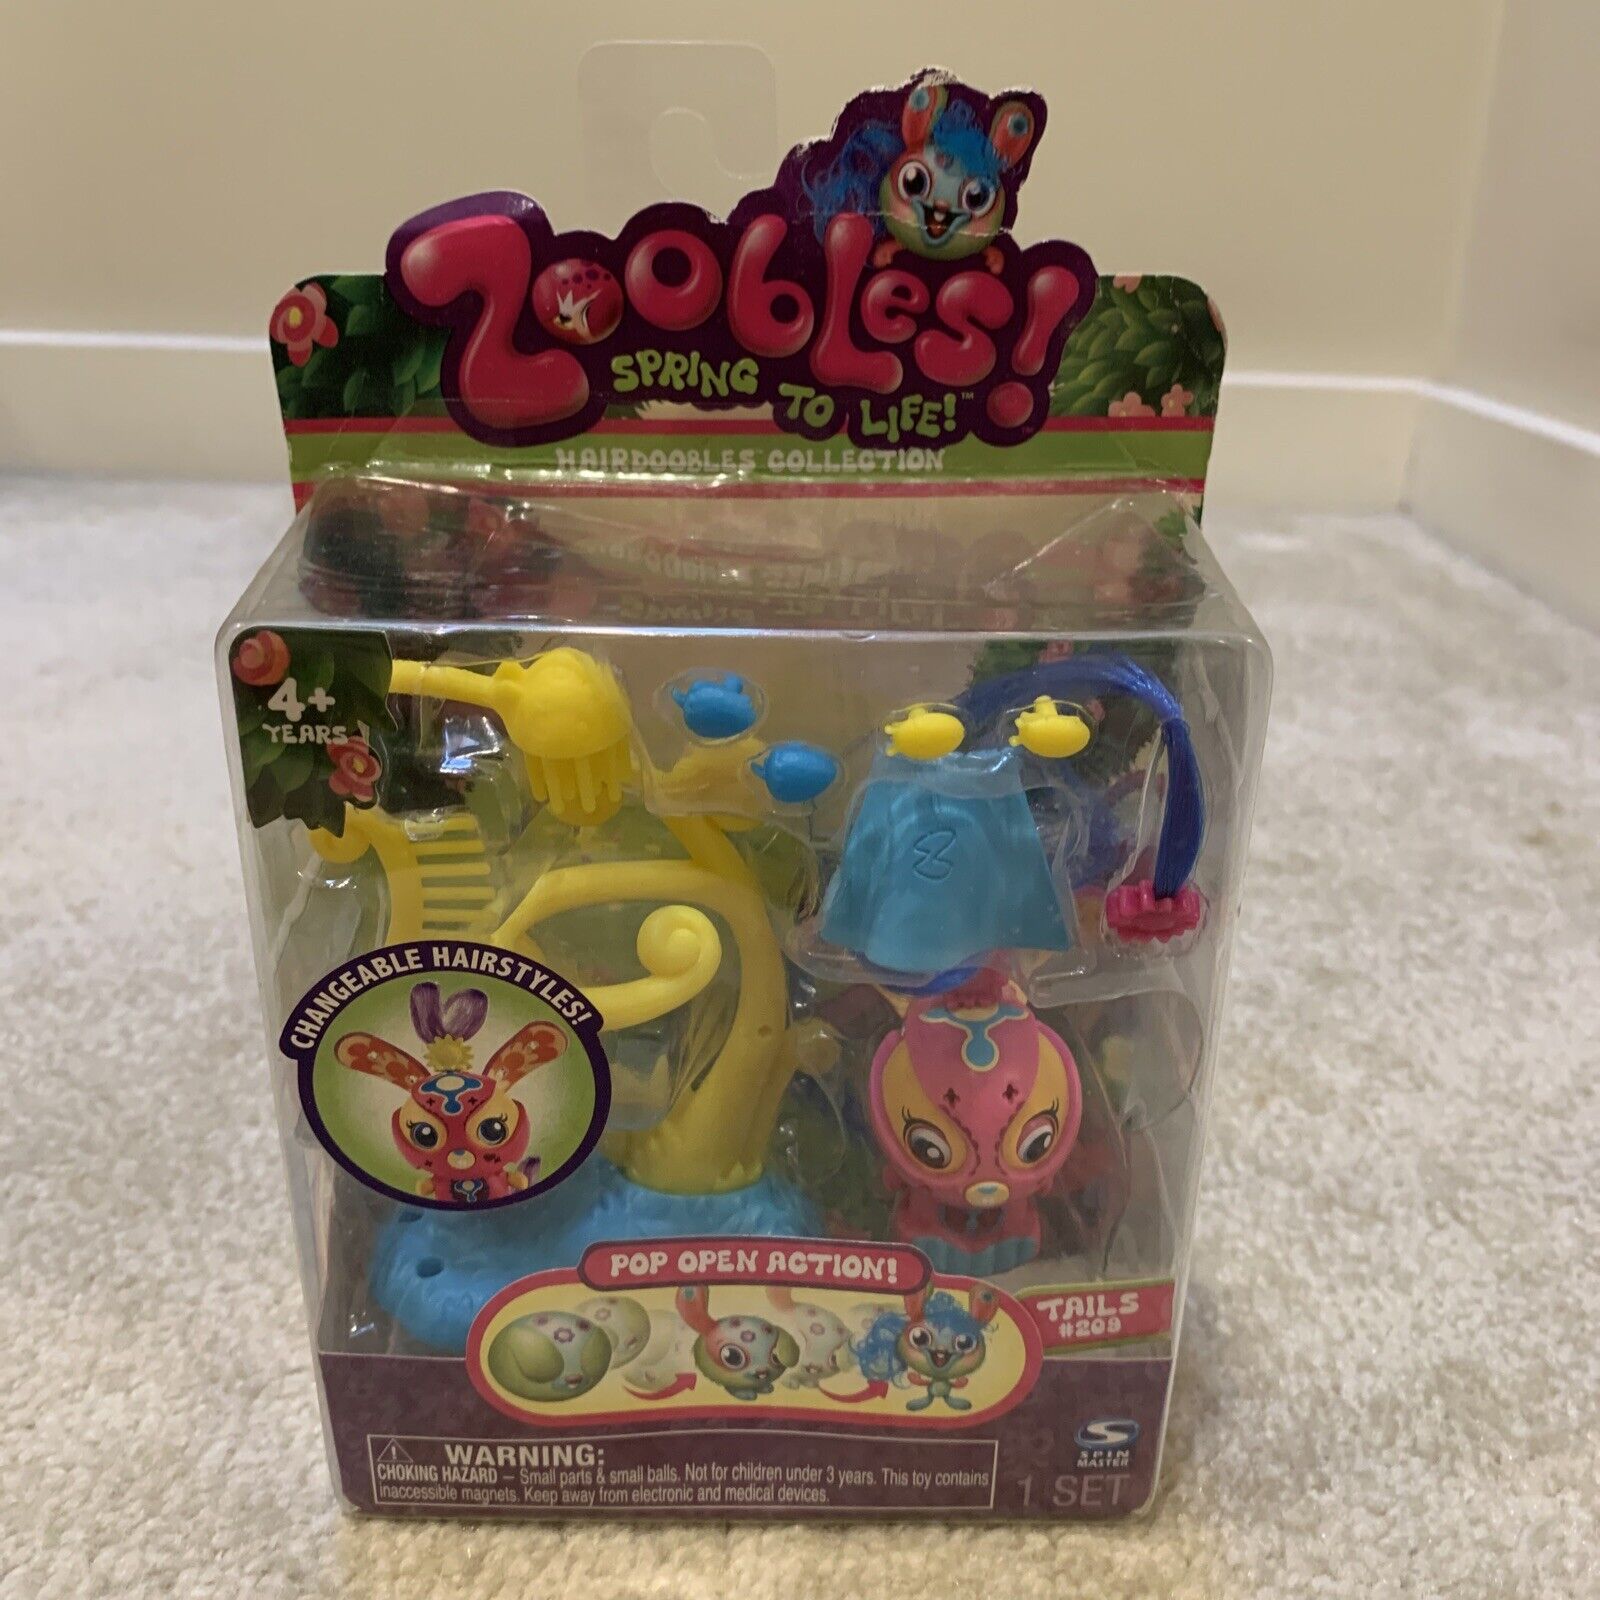 Zoobles Spring to Life Tails #209 Toy Action Figure Hairdoobles Collection NEW